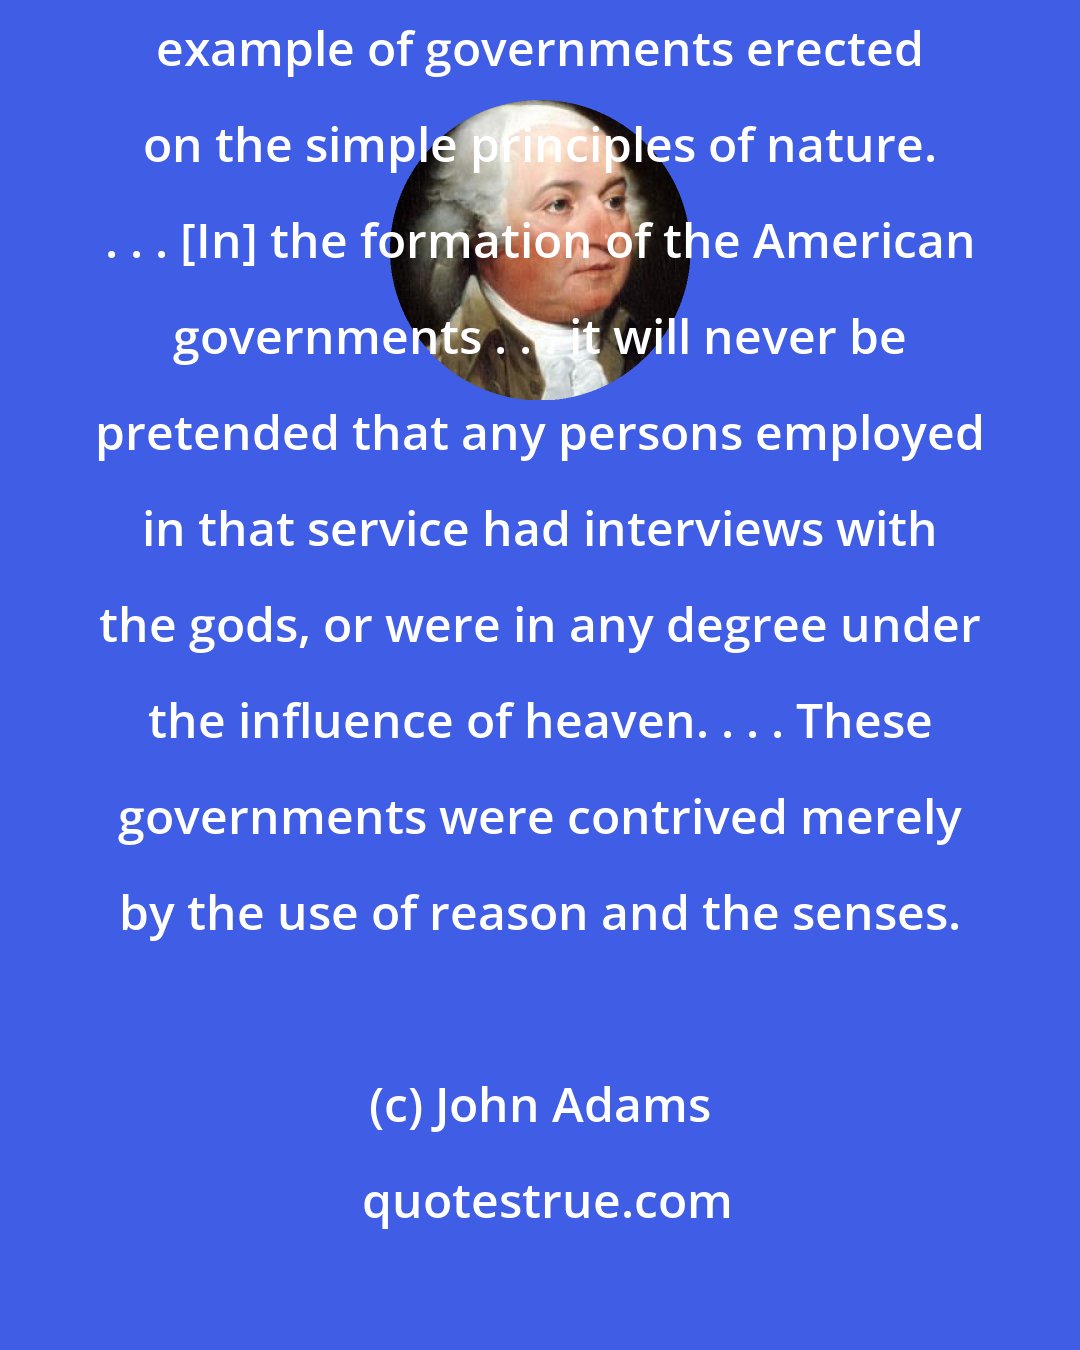 John Adams: The United States of America have exhibited, perhaps, the first example of governments erected on the simple principles of nature. . . . [In] the formation of the American governments . . . it will never be pretended that any persons employed in that service had interviews with the gods, or were in any degree under the influence of heaven. . . . These governments were contrived merely by the use of reason and the senses.